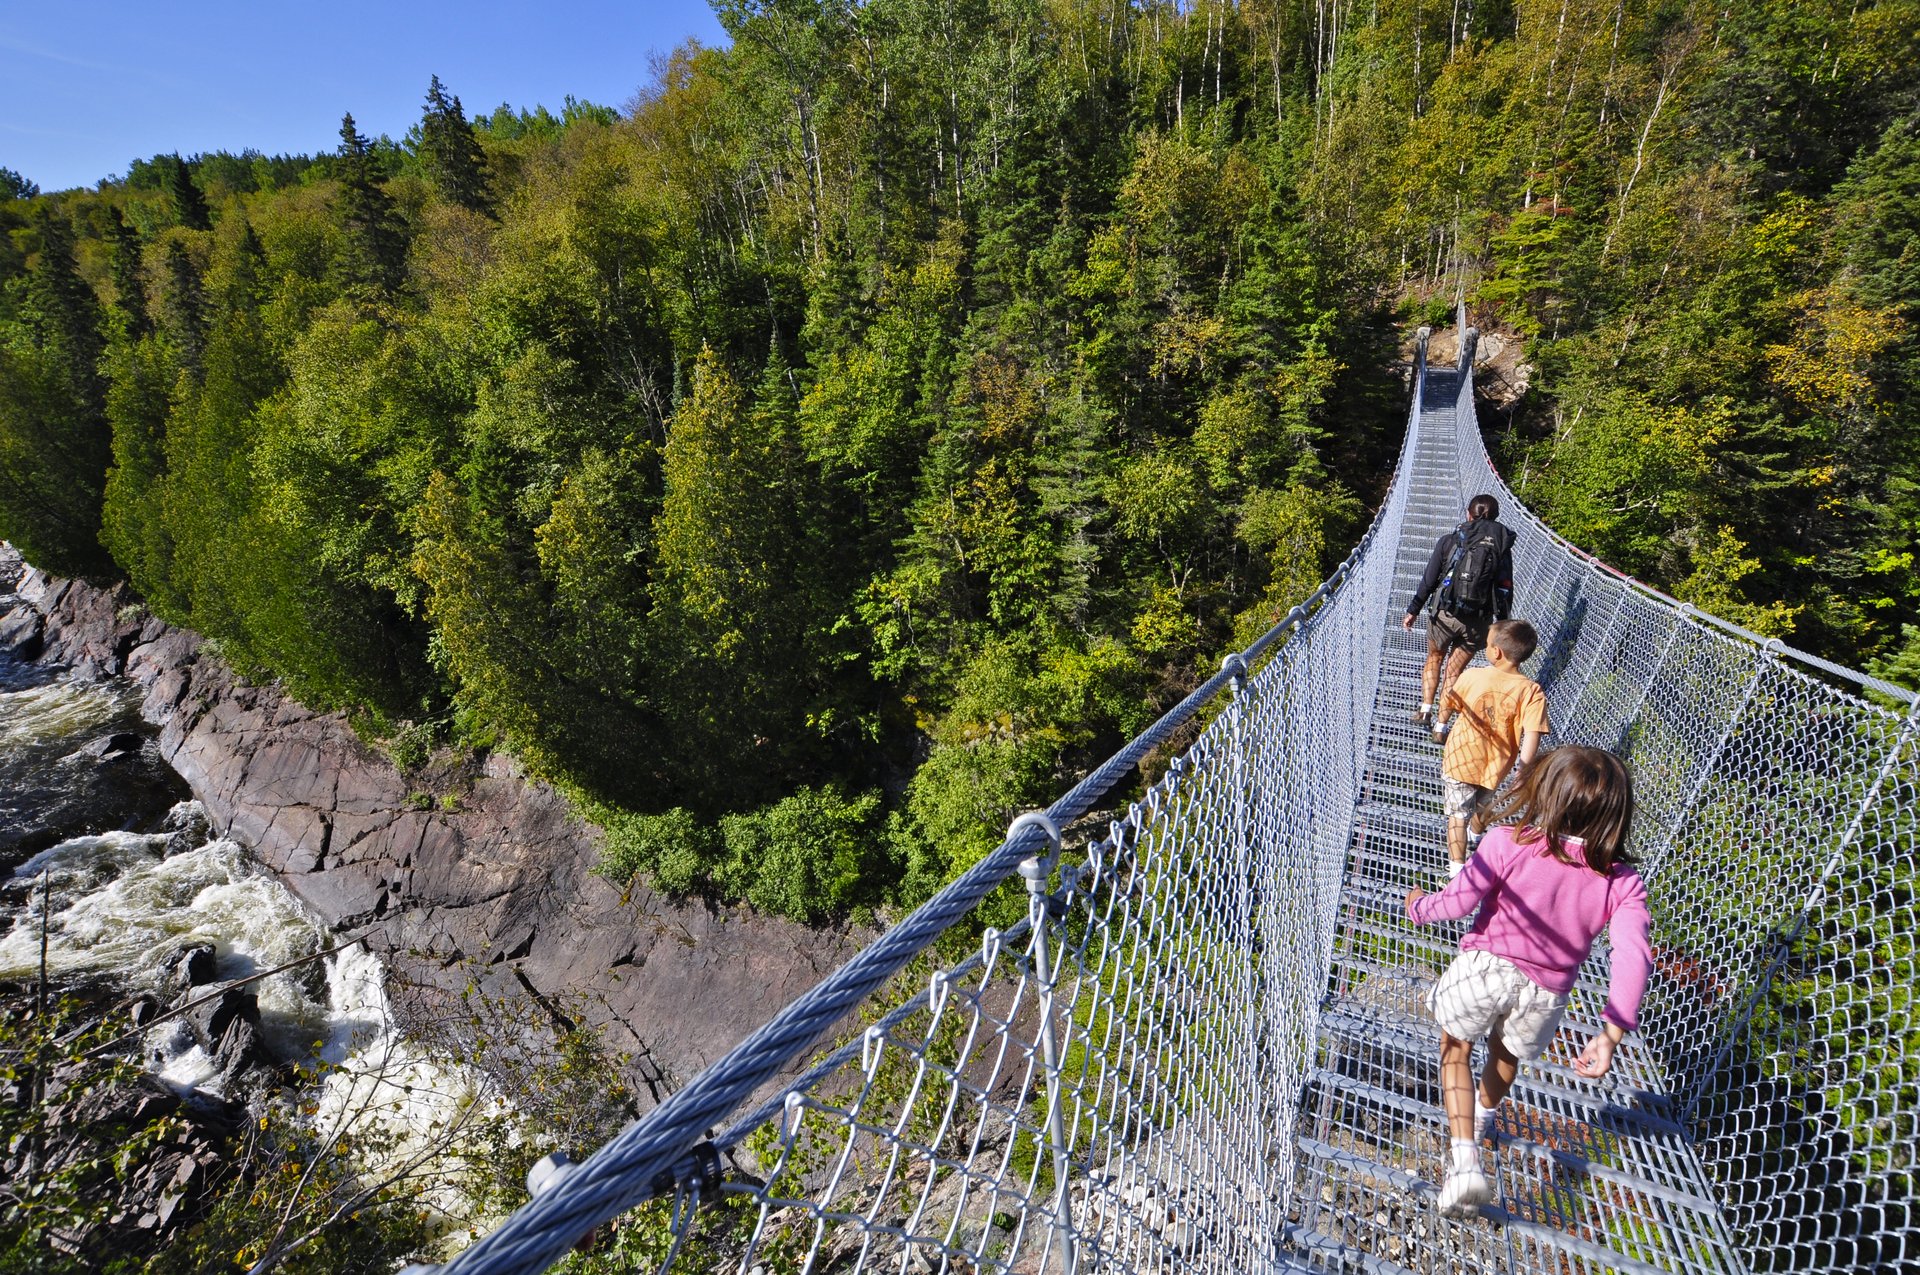 hiking along the White River Suspension Bridge in Pukaskwa National Park